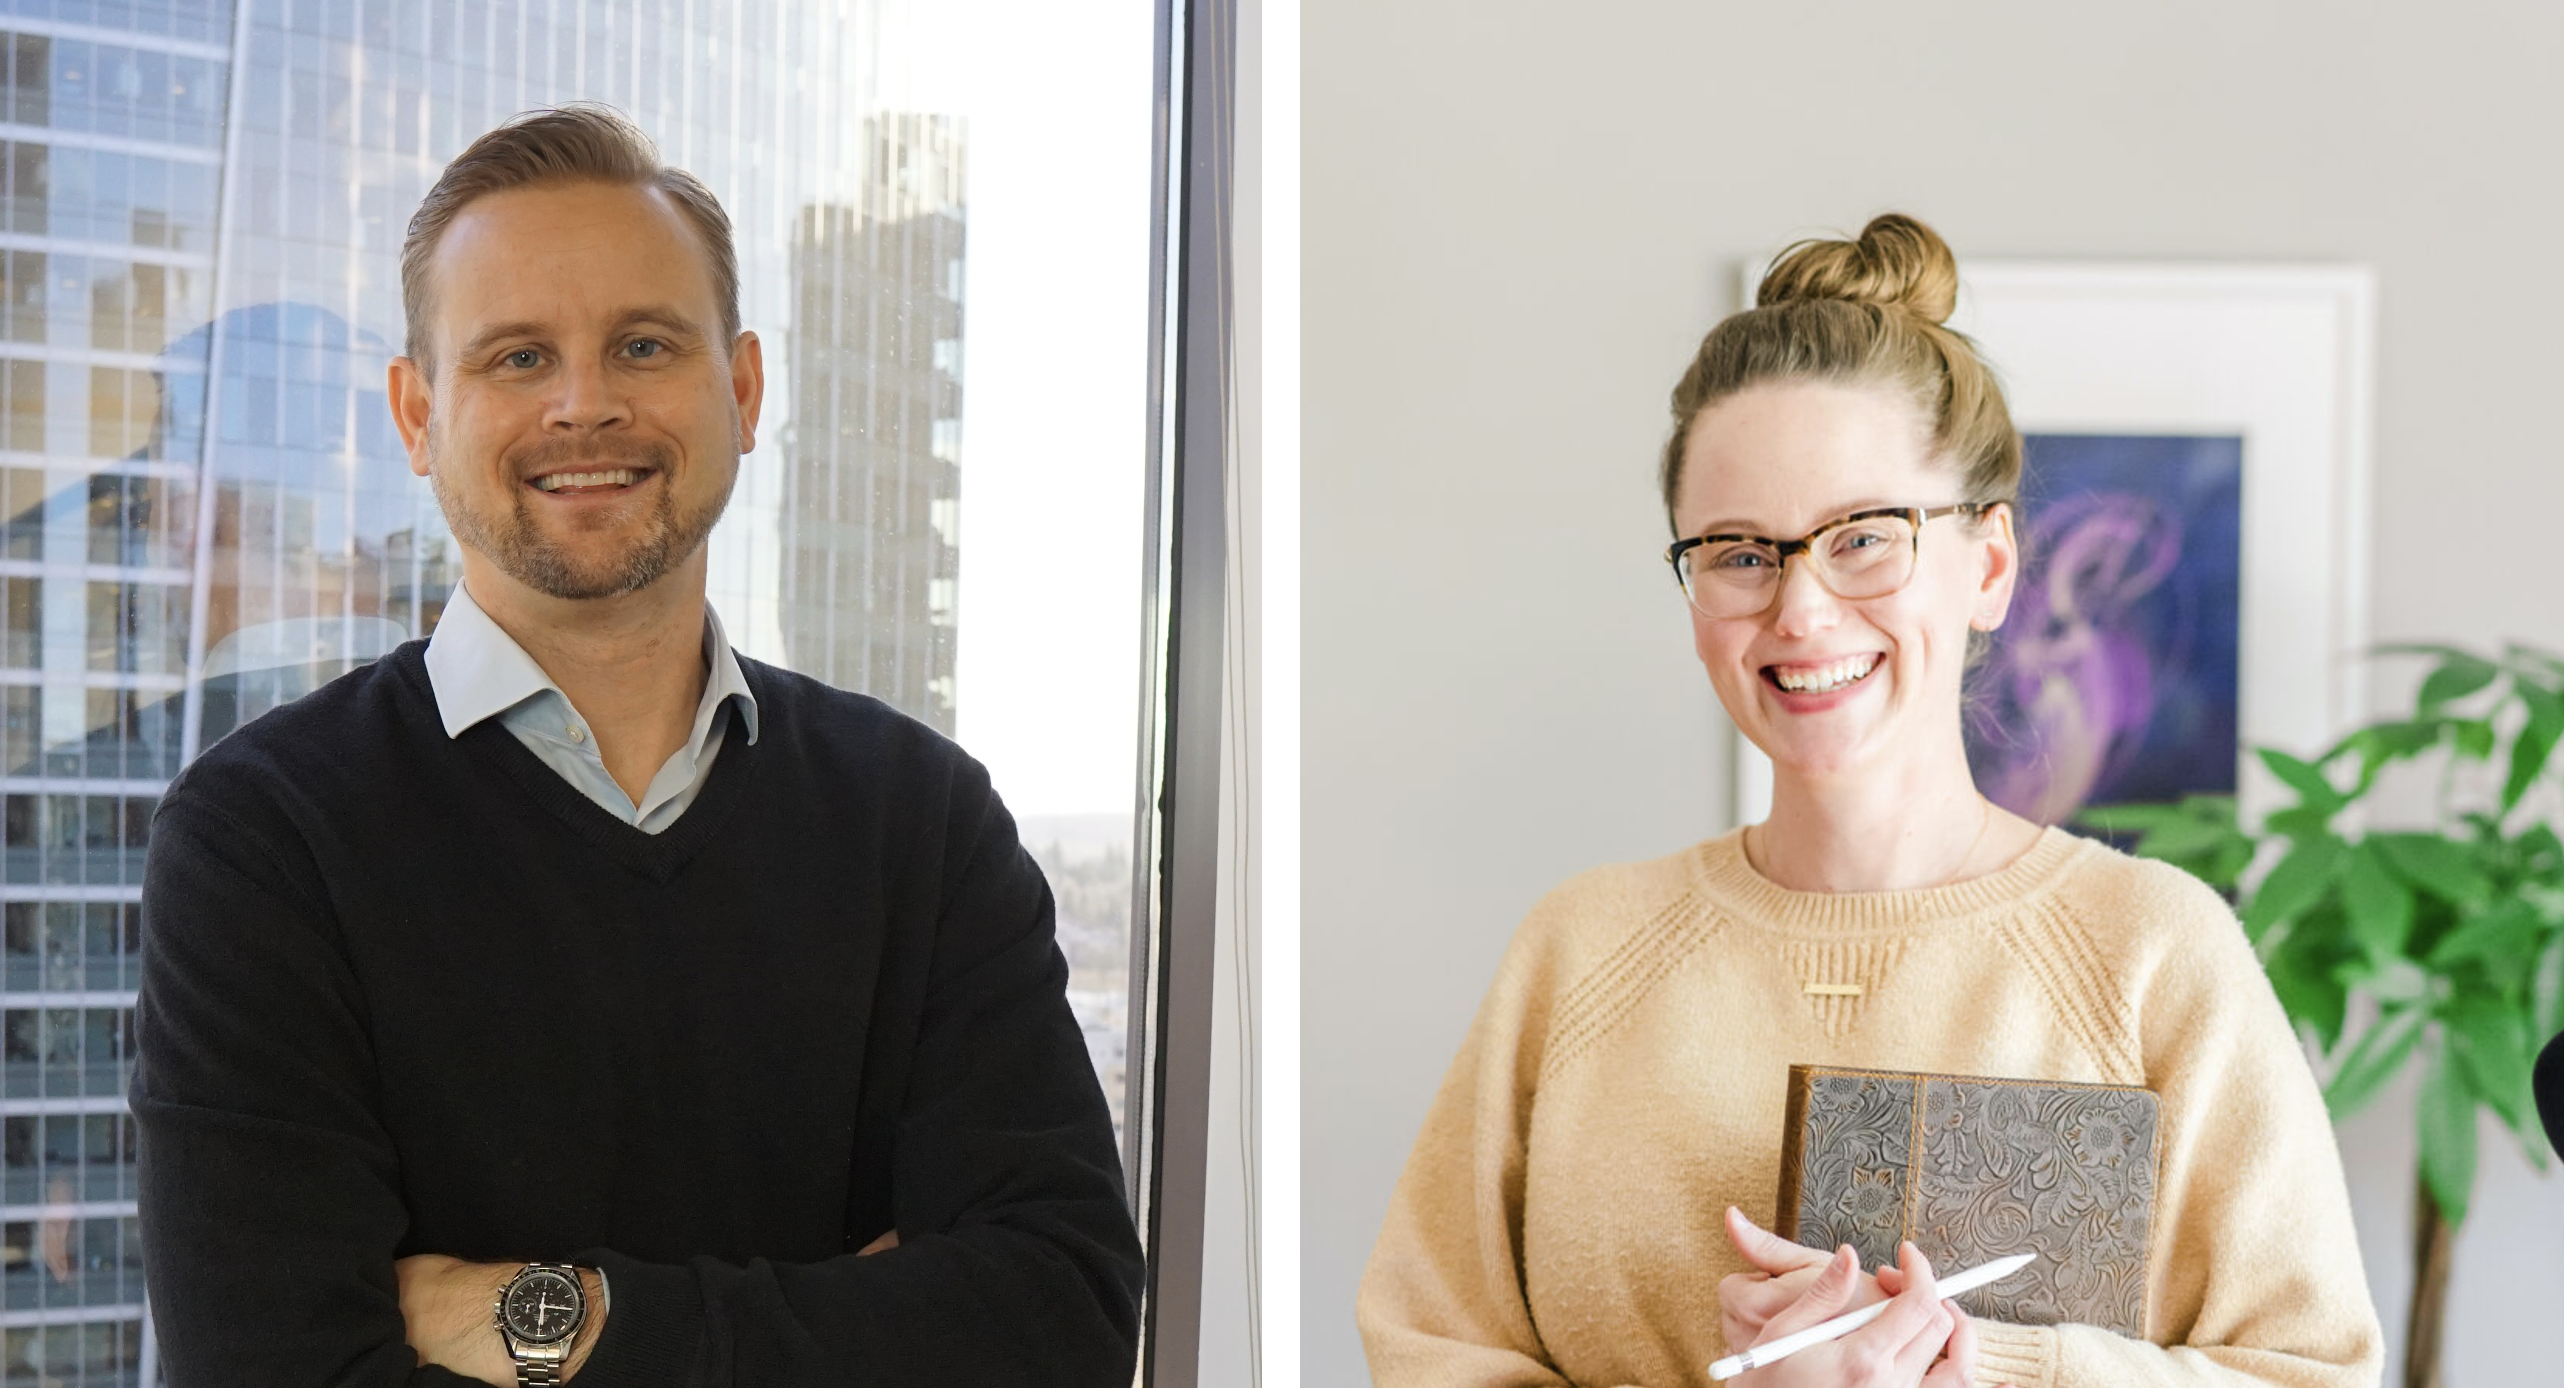 Photo of Data Literacy speakers Ben Jones and Alli Torban standing next to each other in an office.